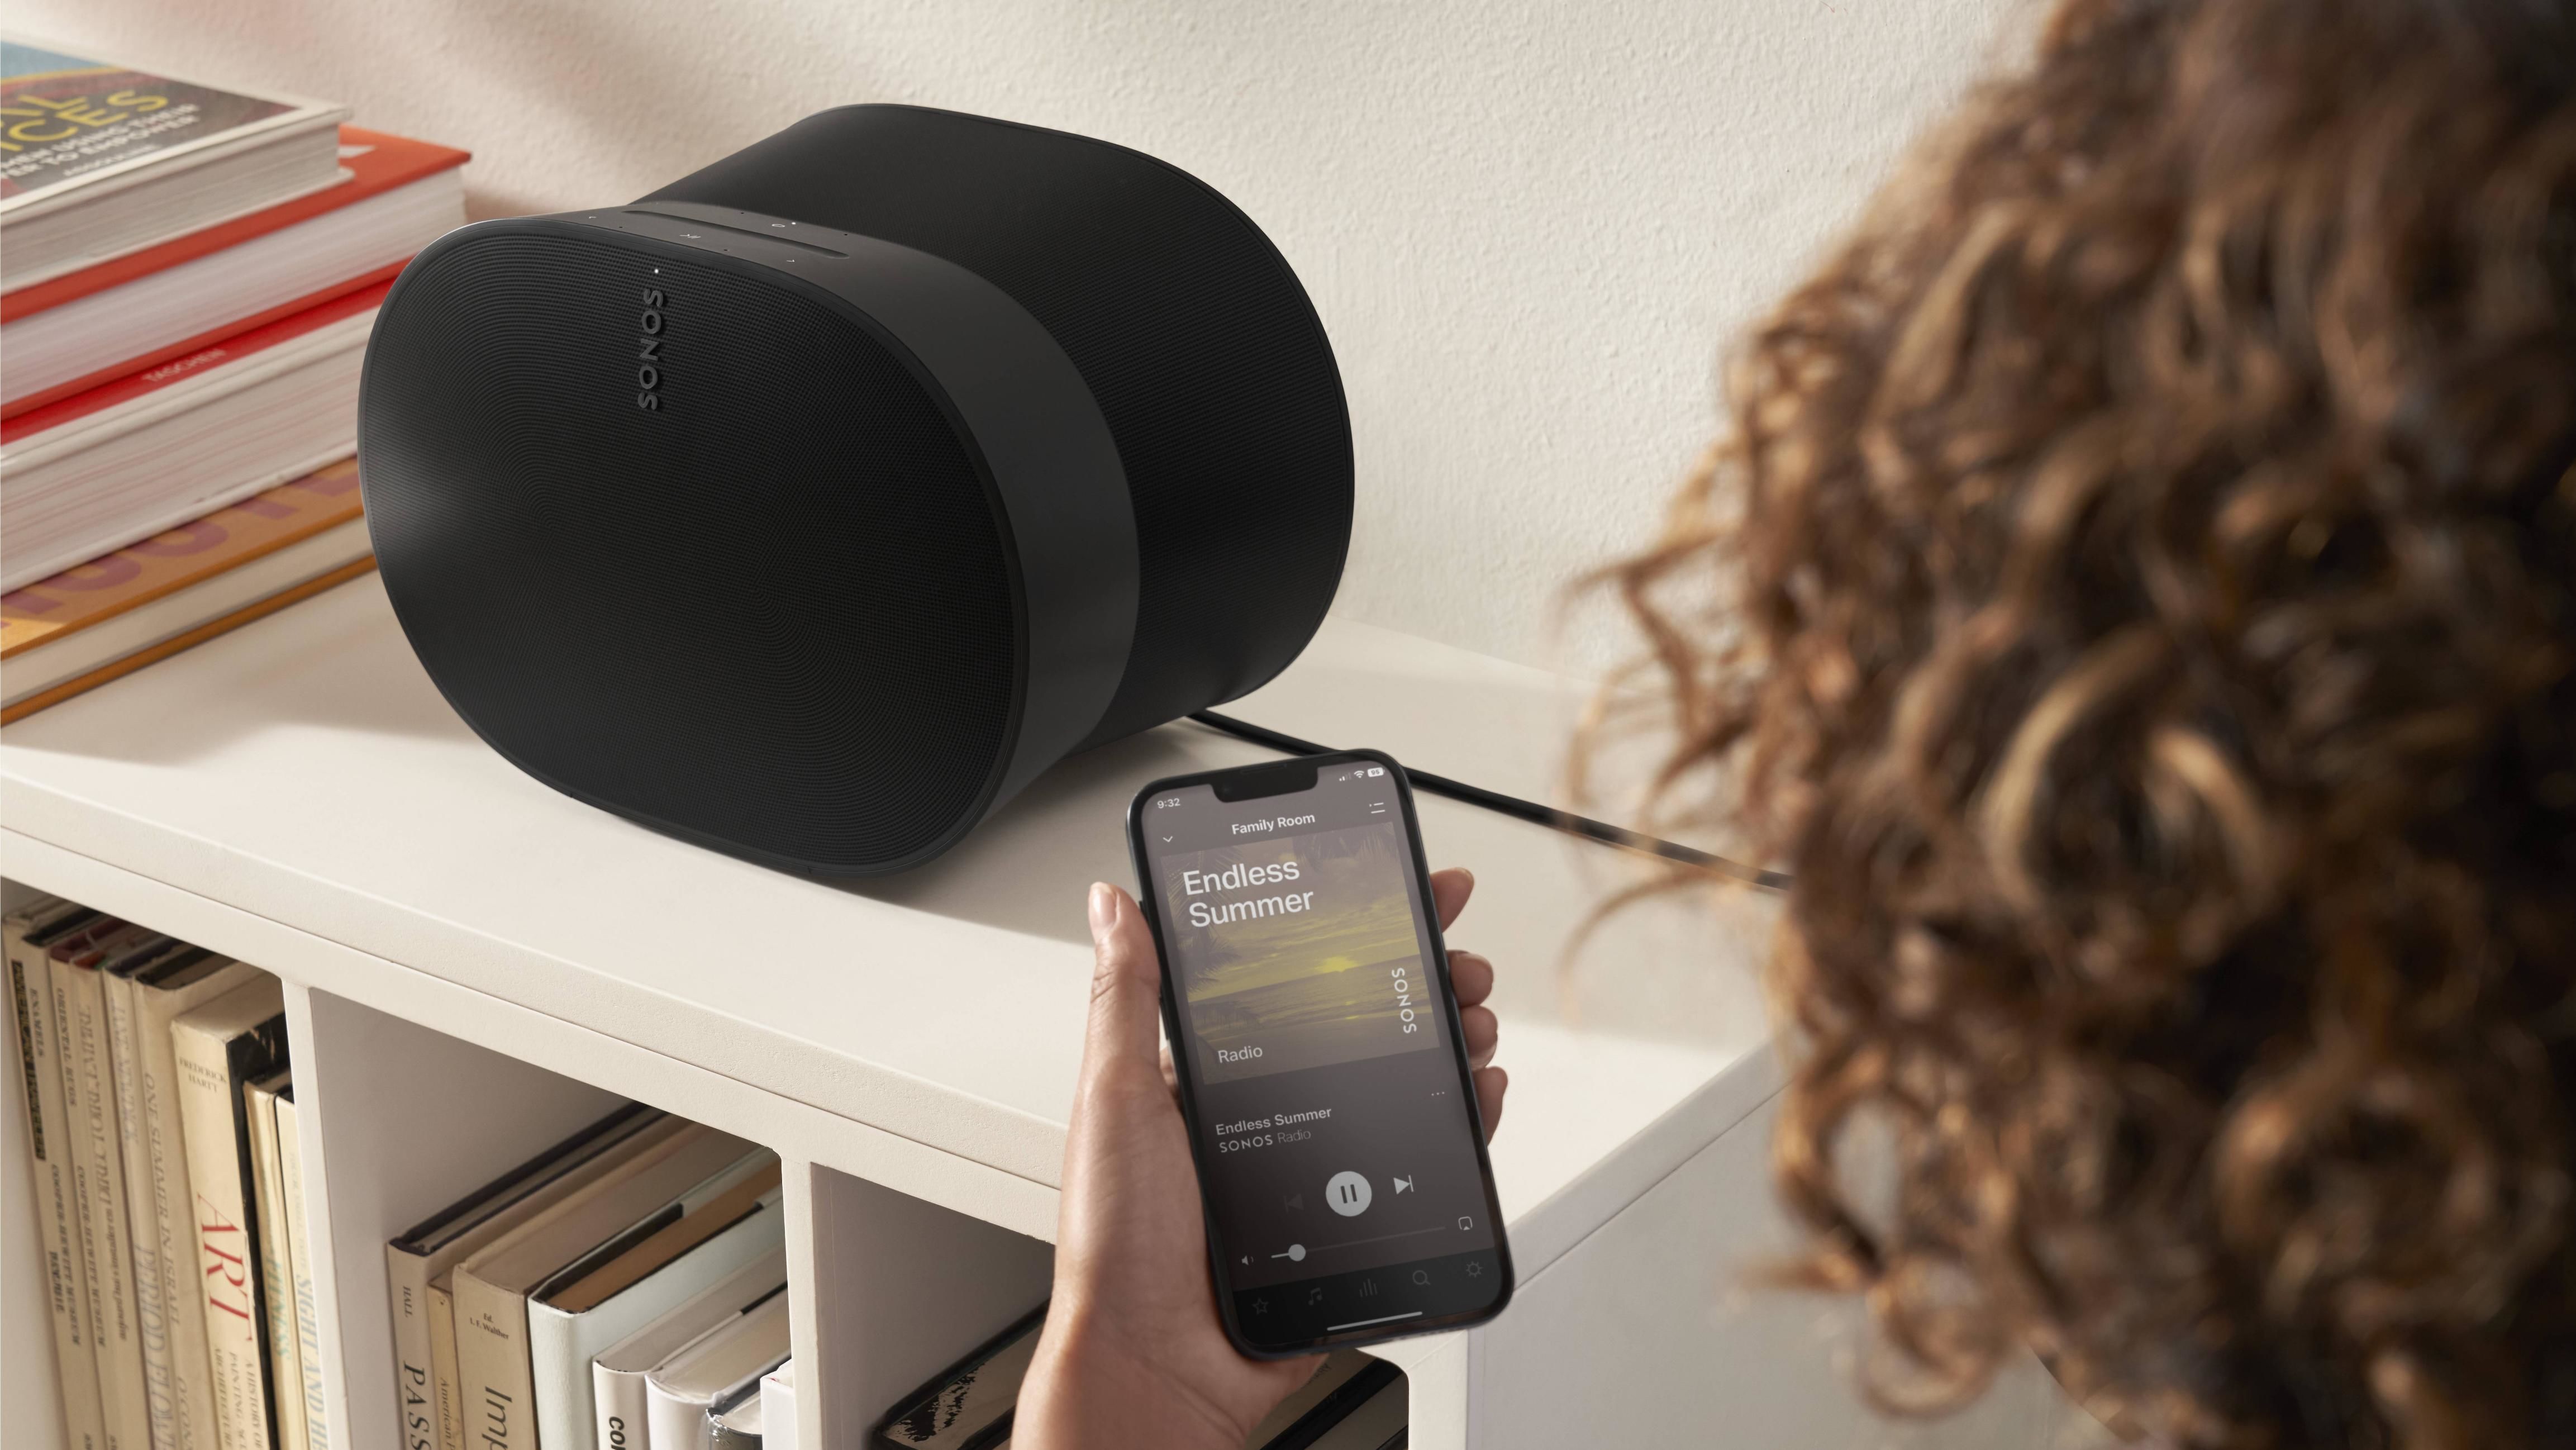 Sonos Era 100, Era 300: all-in on spatial audio and Bluetooth